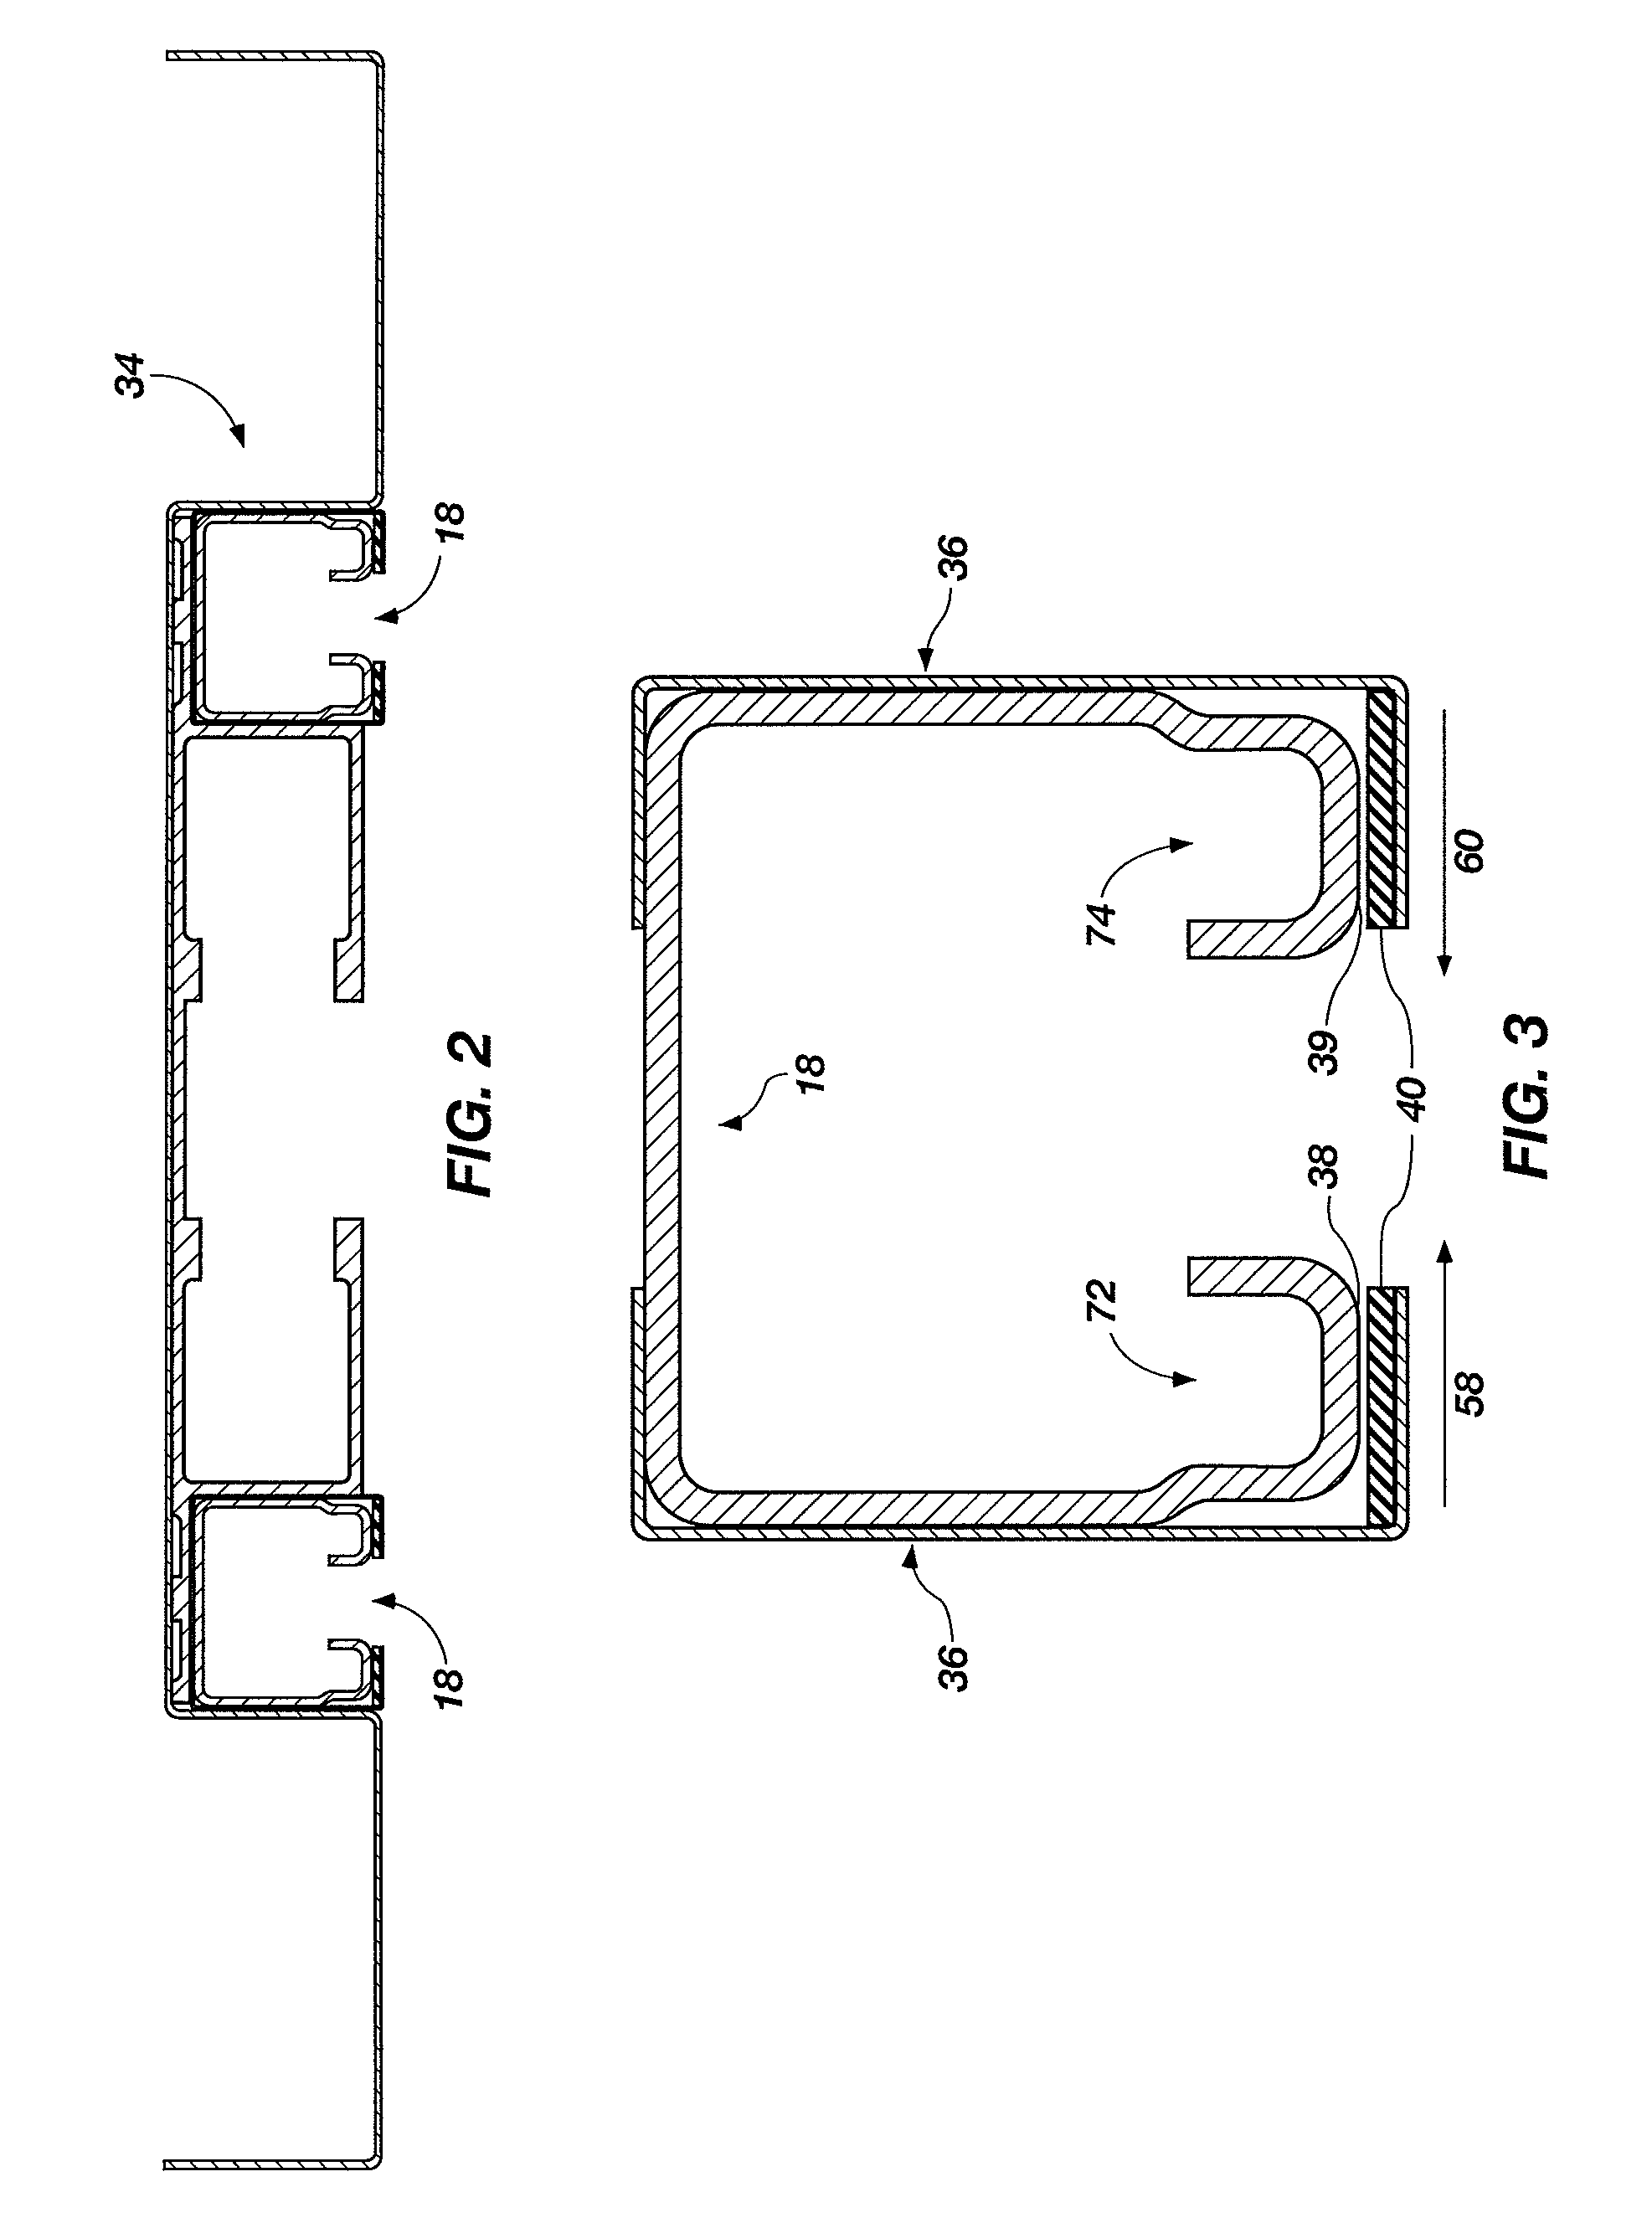 Movable partition systems including intumescent material and methods of controlling and directing intumescent material around the perimeter of a movable partition system